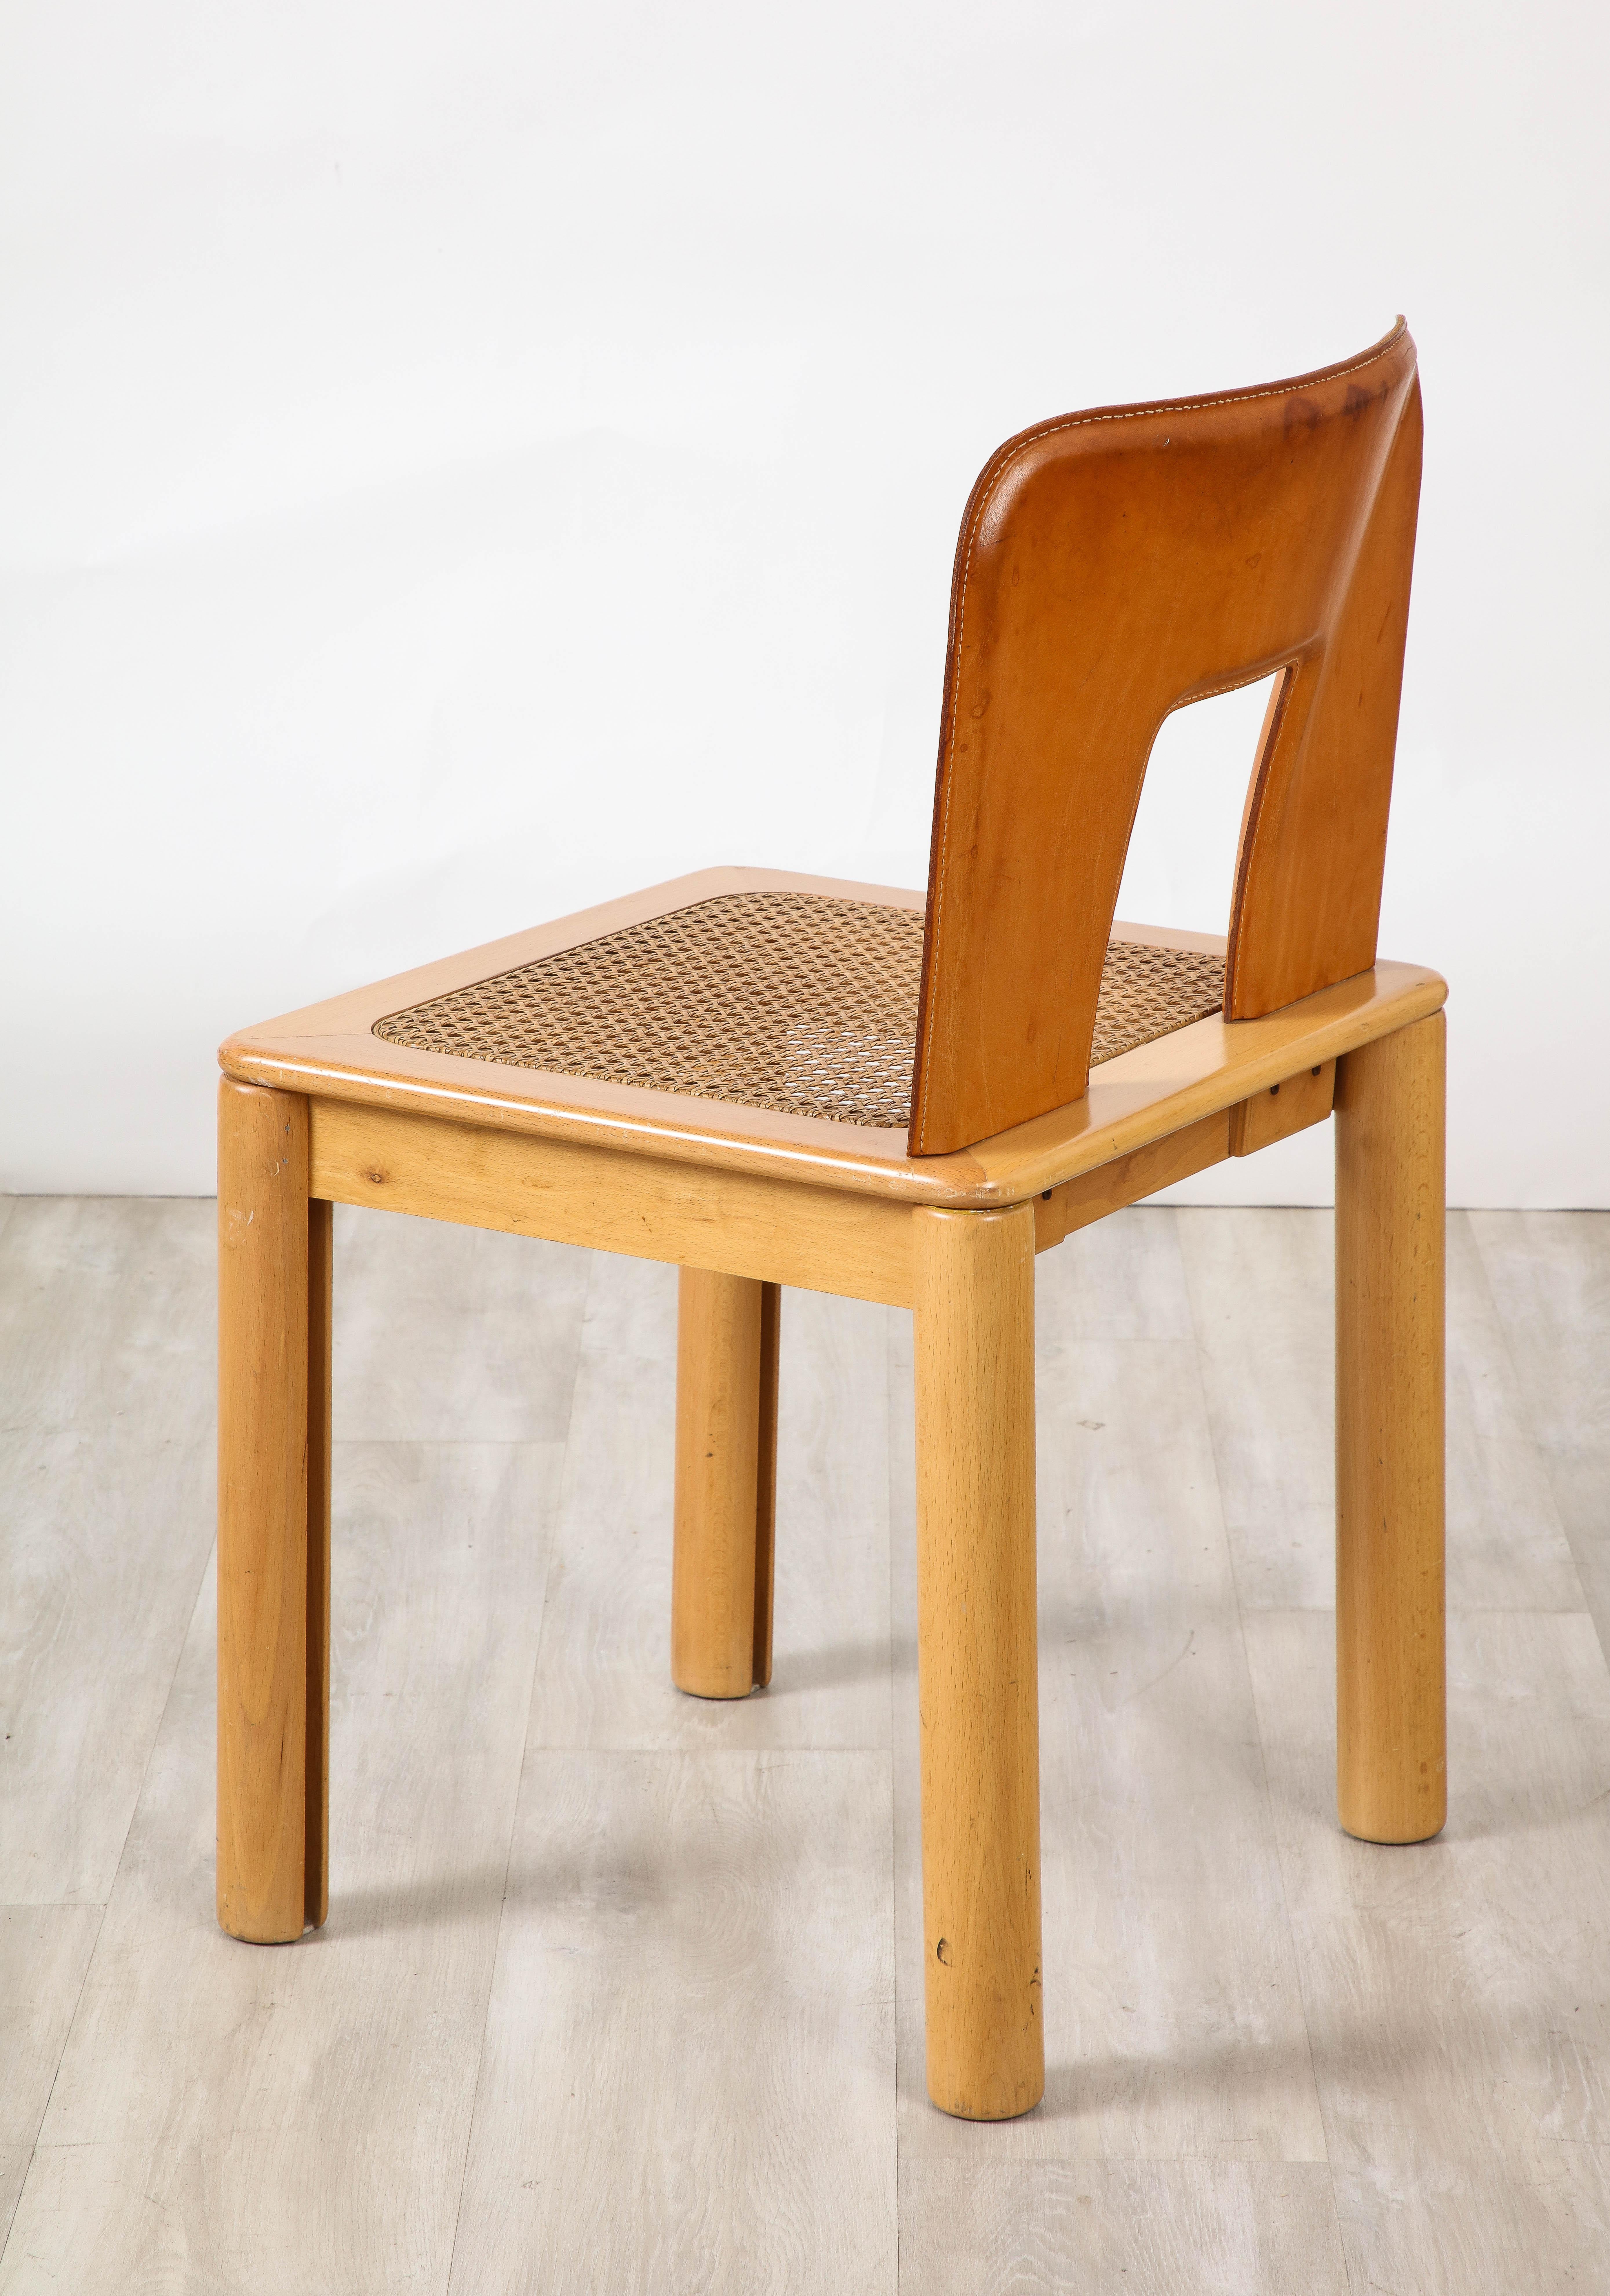 Italian 1970's Dining Chairs with Leather, Wood, Cane Seats, Italy, circa 1970 For Sale 13